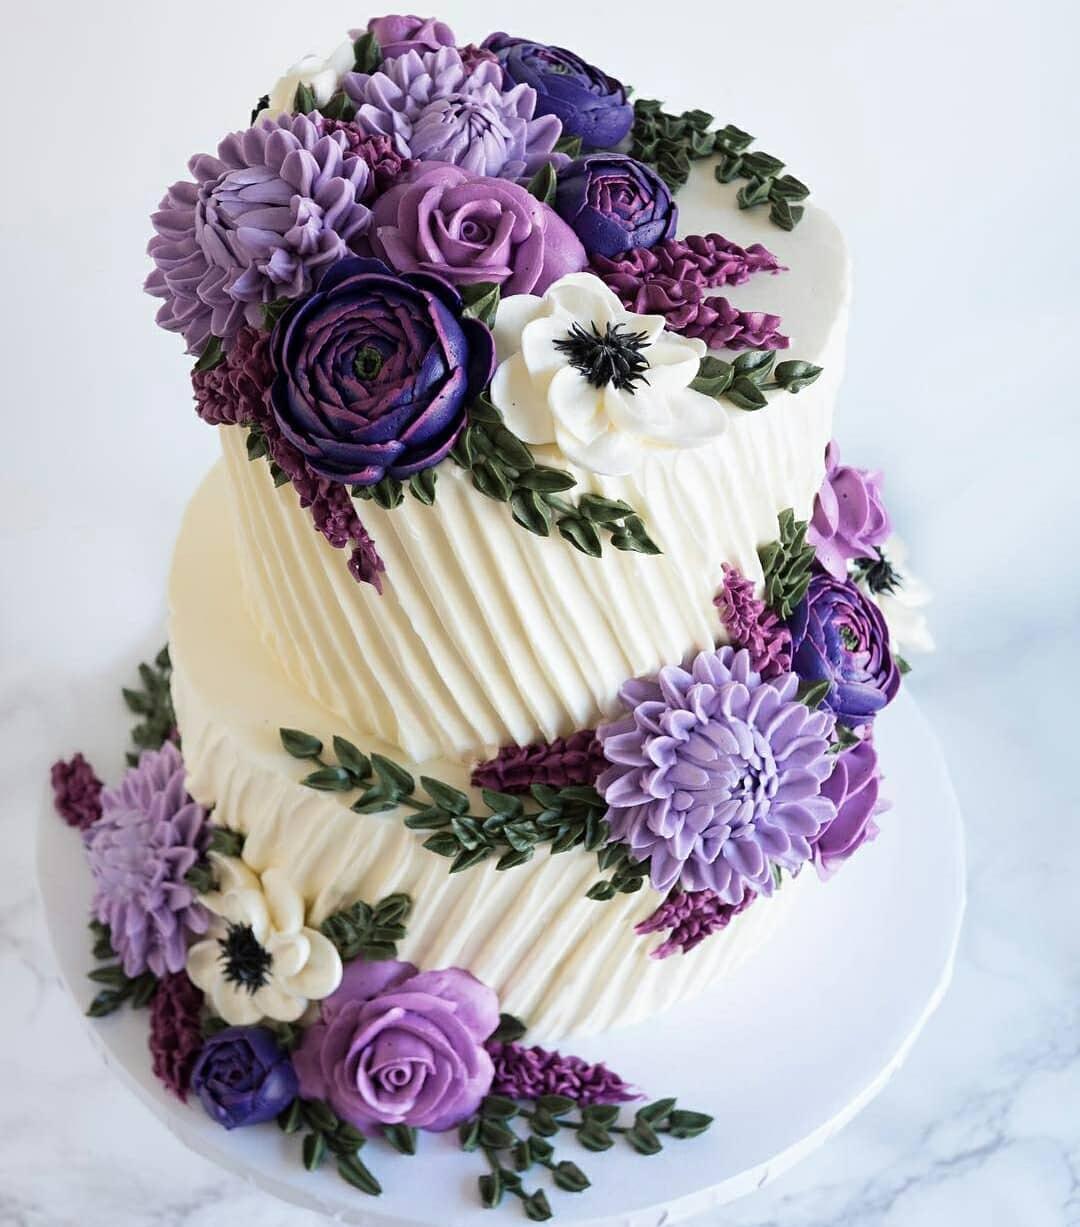 Happy Wedding Anniversary Cake And Where To Get It For Your Big Day